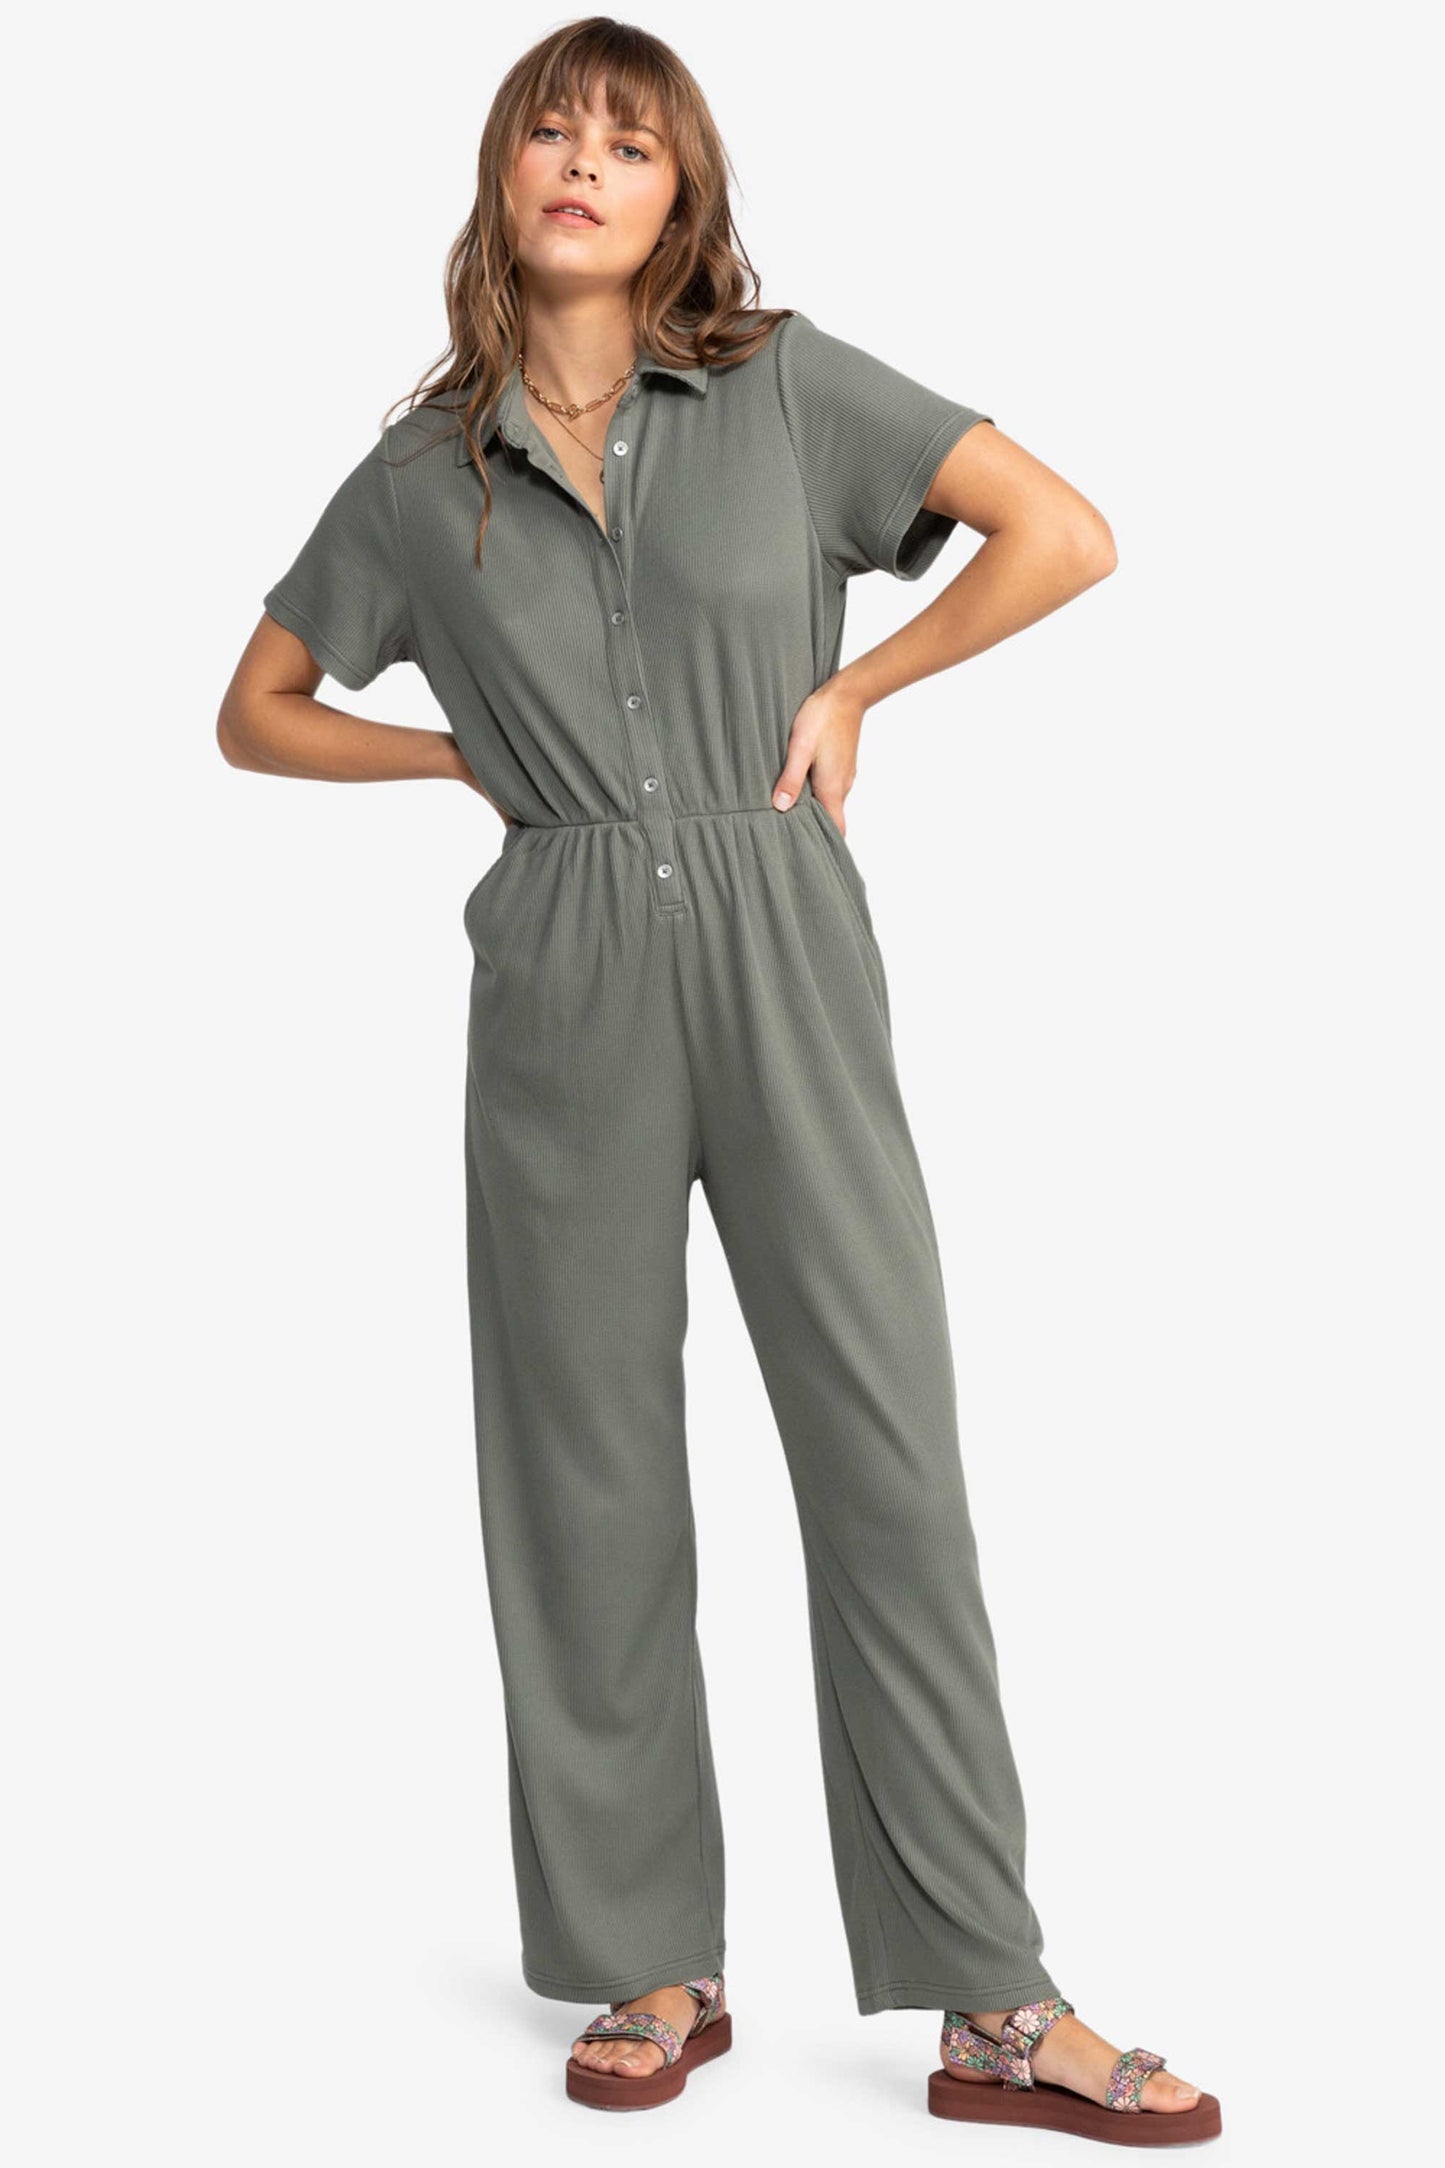 Pukas-Surf-Shop-roxy-woman-jumpsuit-blue-side-of-the-sky-green